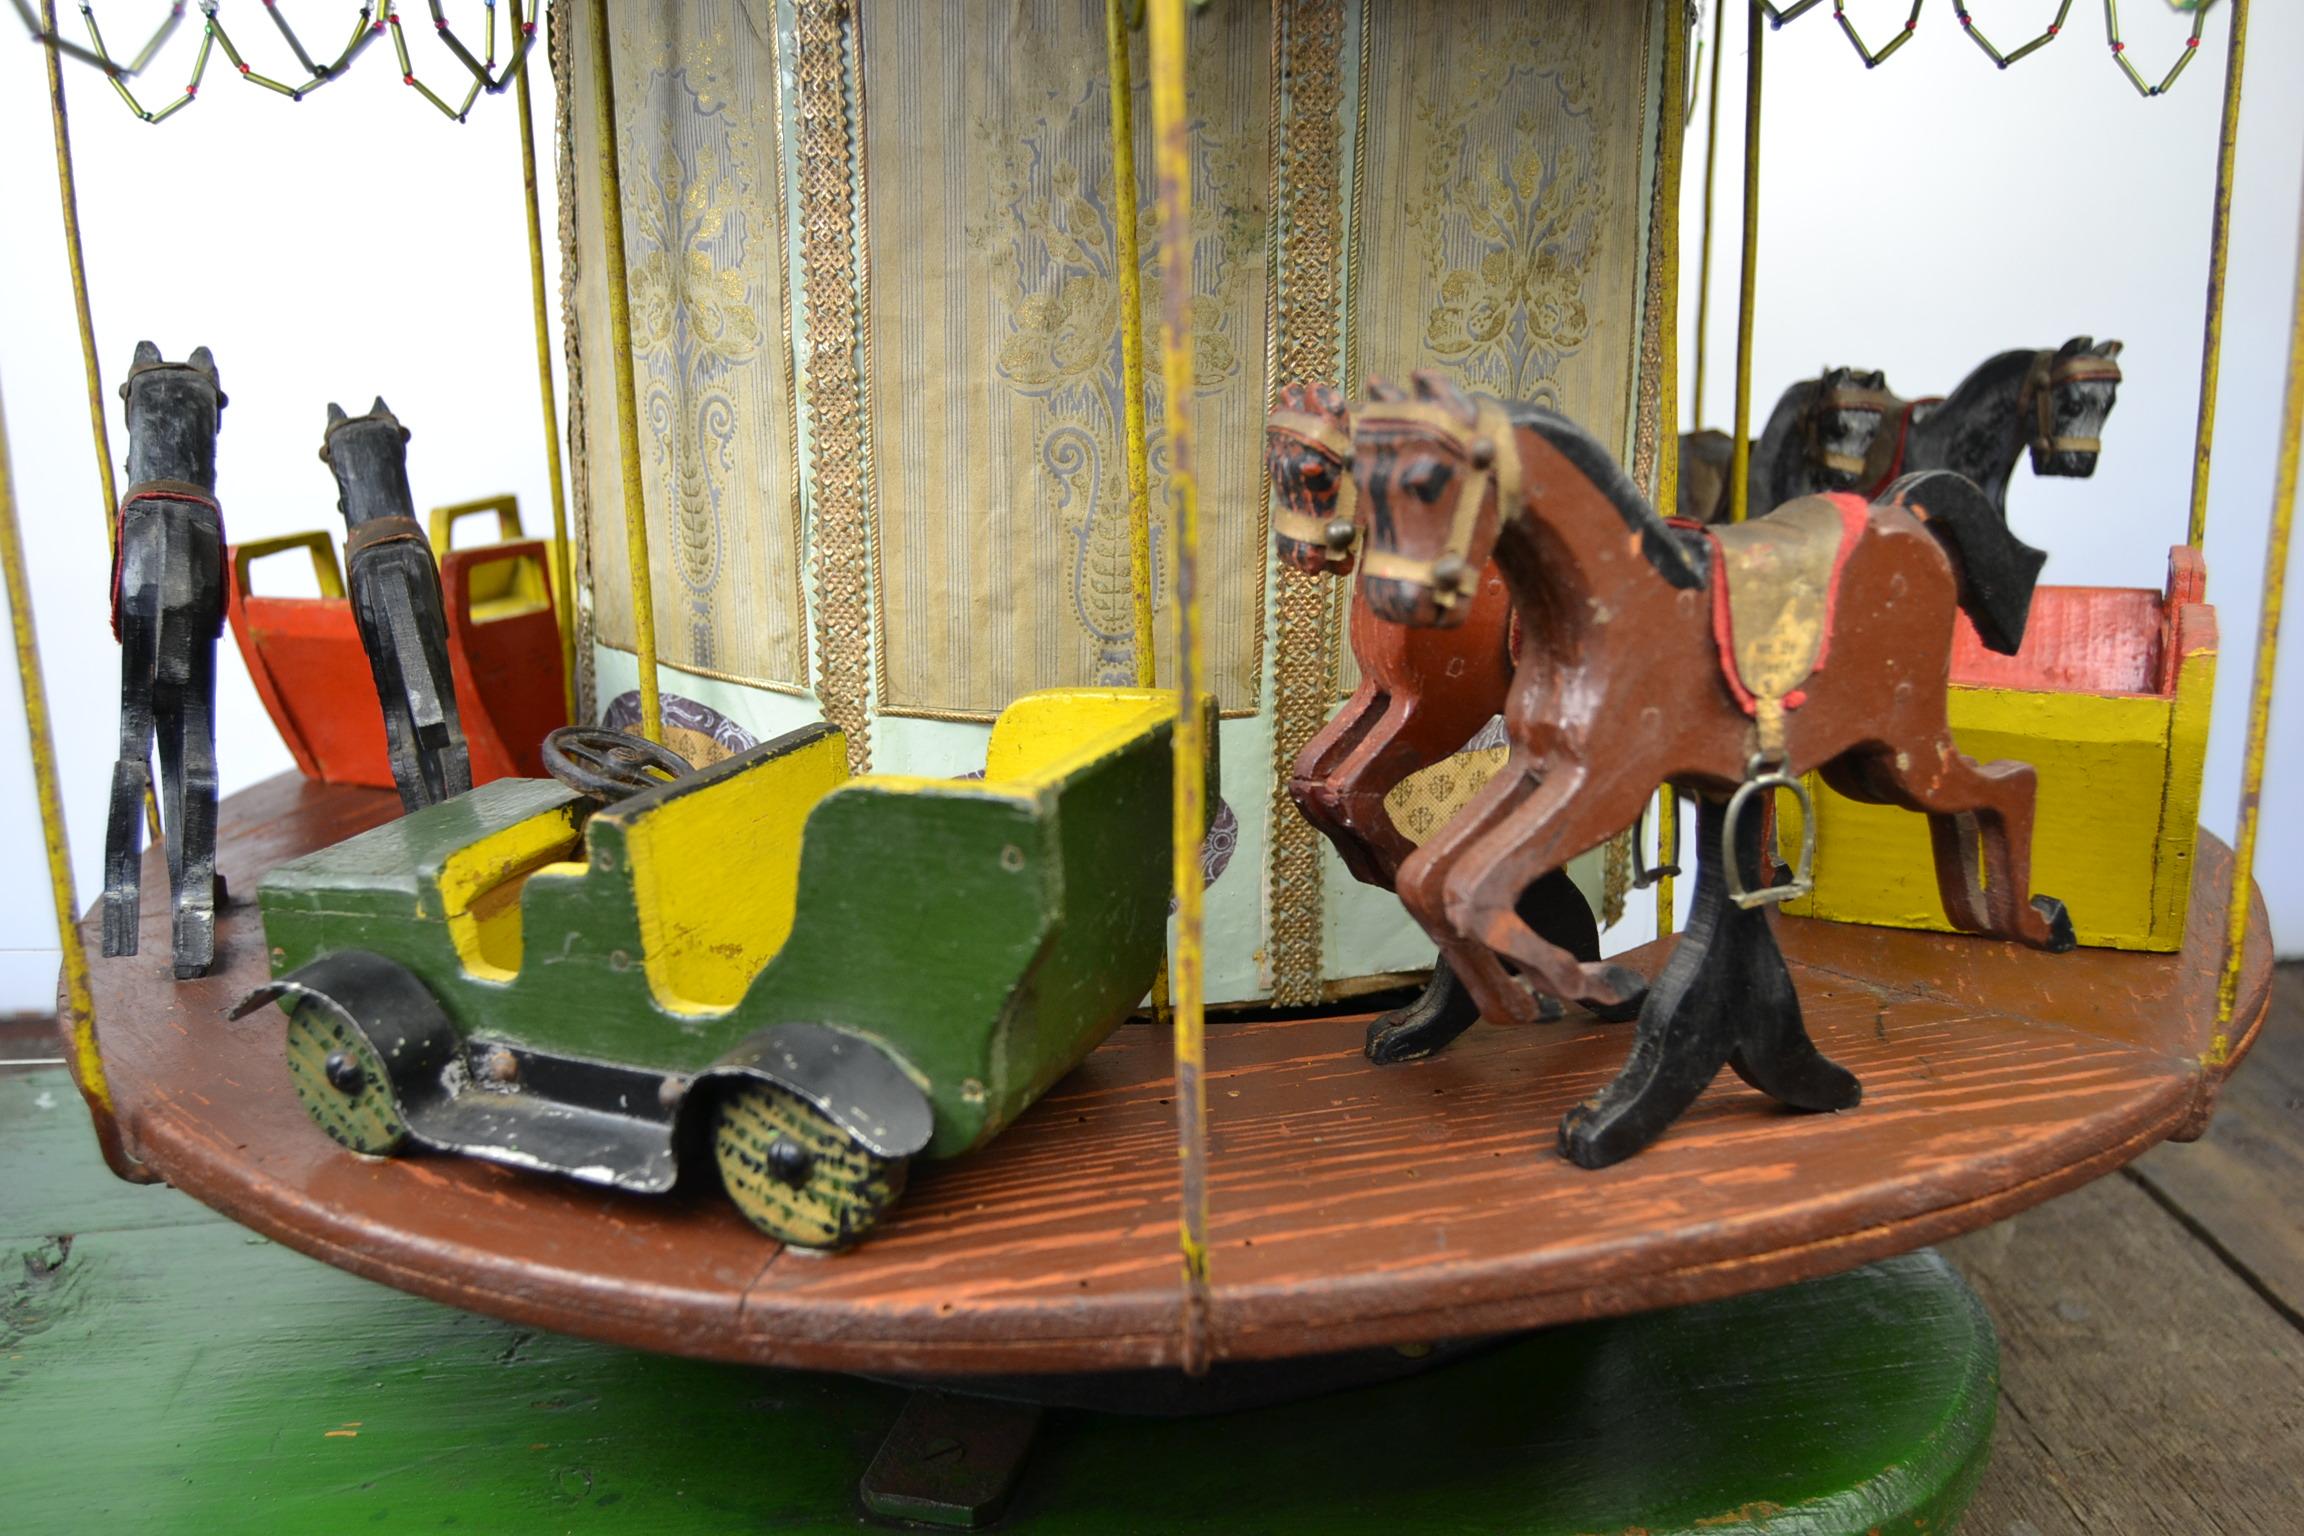 Hand-Carved Large Folk Art Wooden Merry-Go-Round Model For Sale